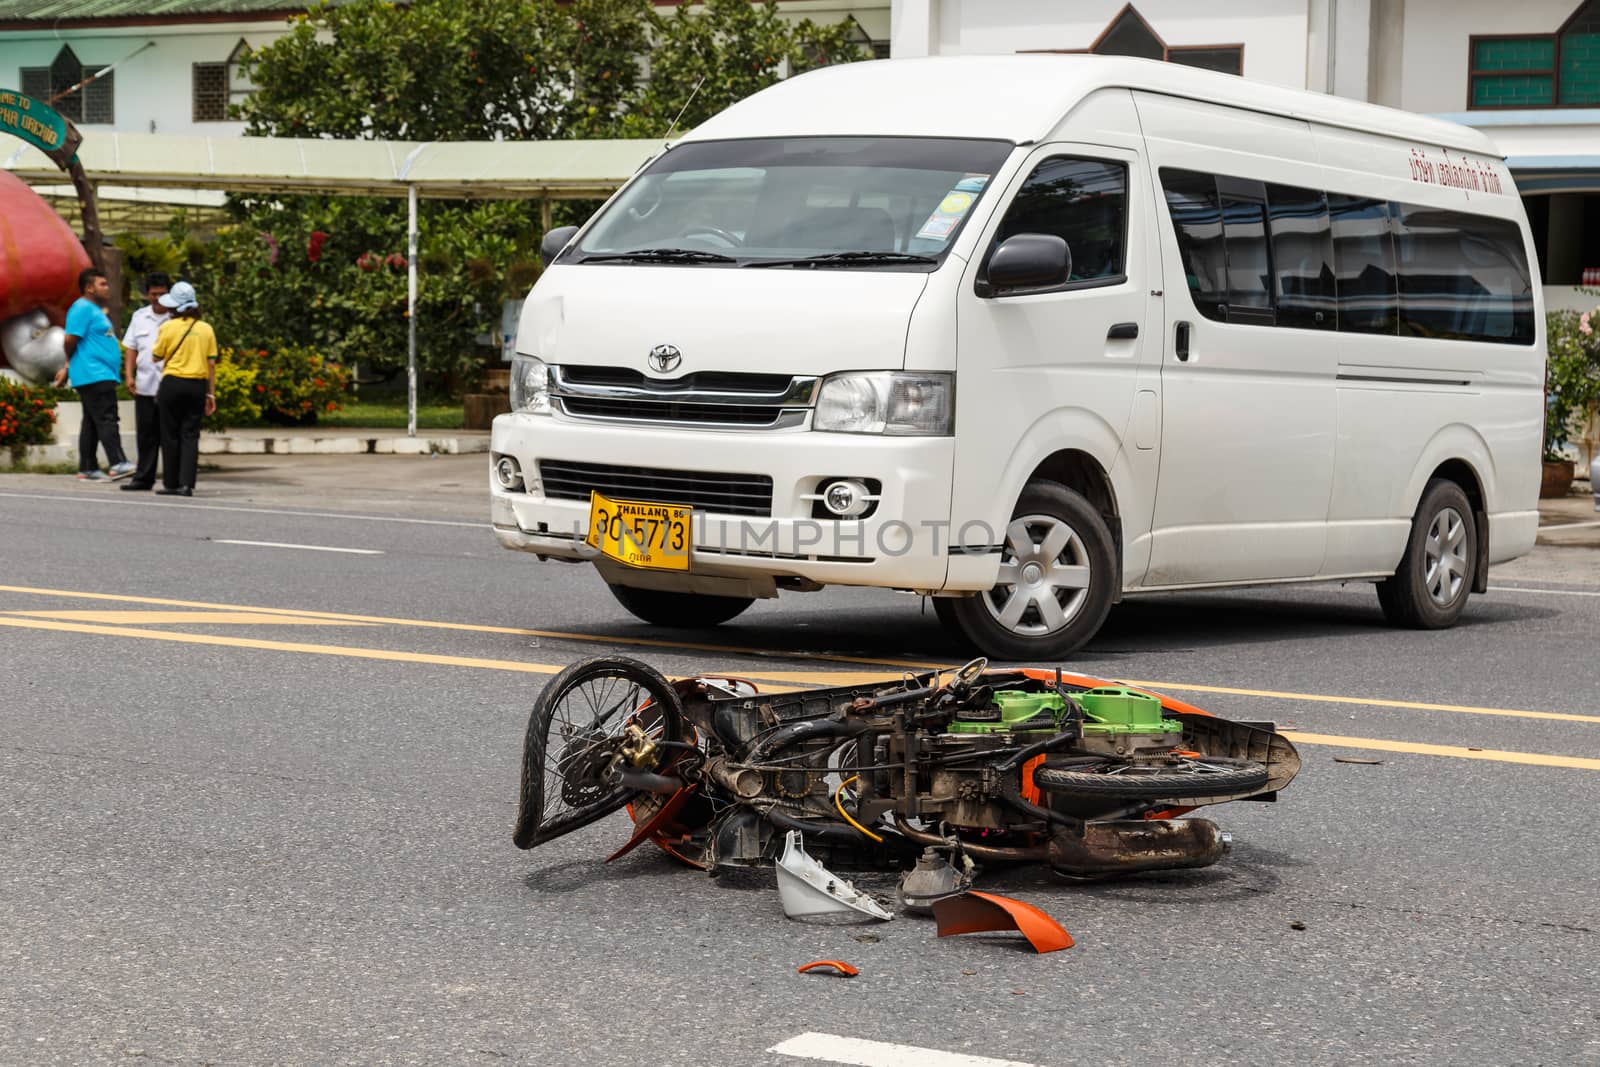 PHUKET, THAILAND - NOVEMBER 3 : Van accident on the road and cra by nanDphanuwat